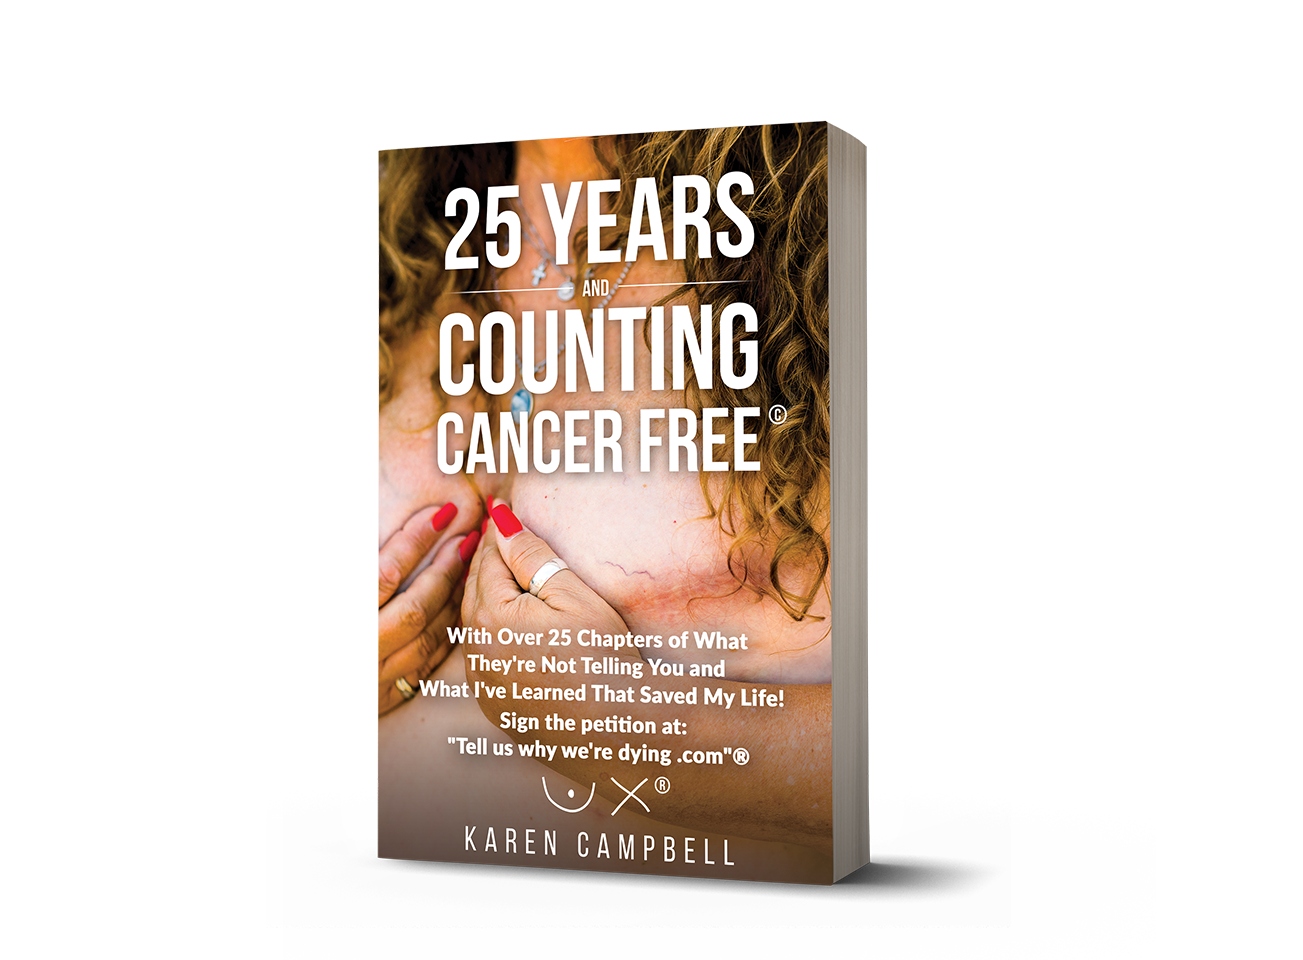 25 Years and Counting Cancer Free©